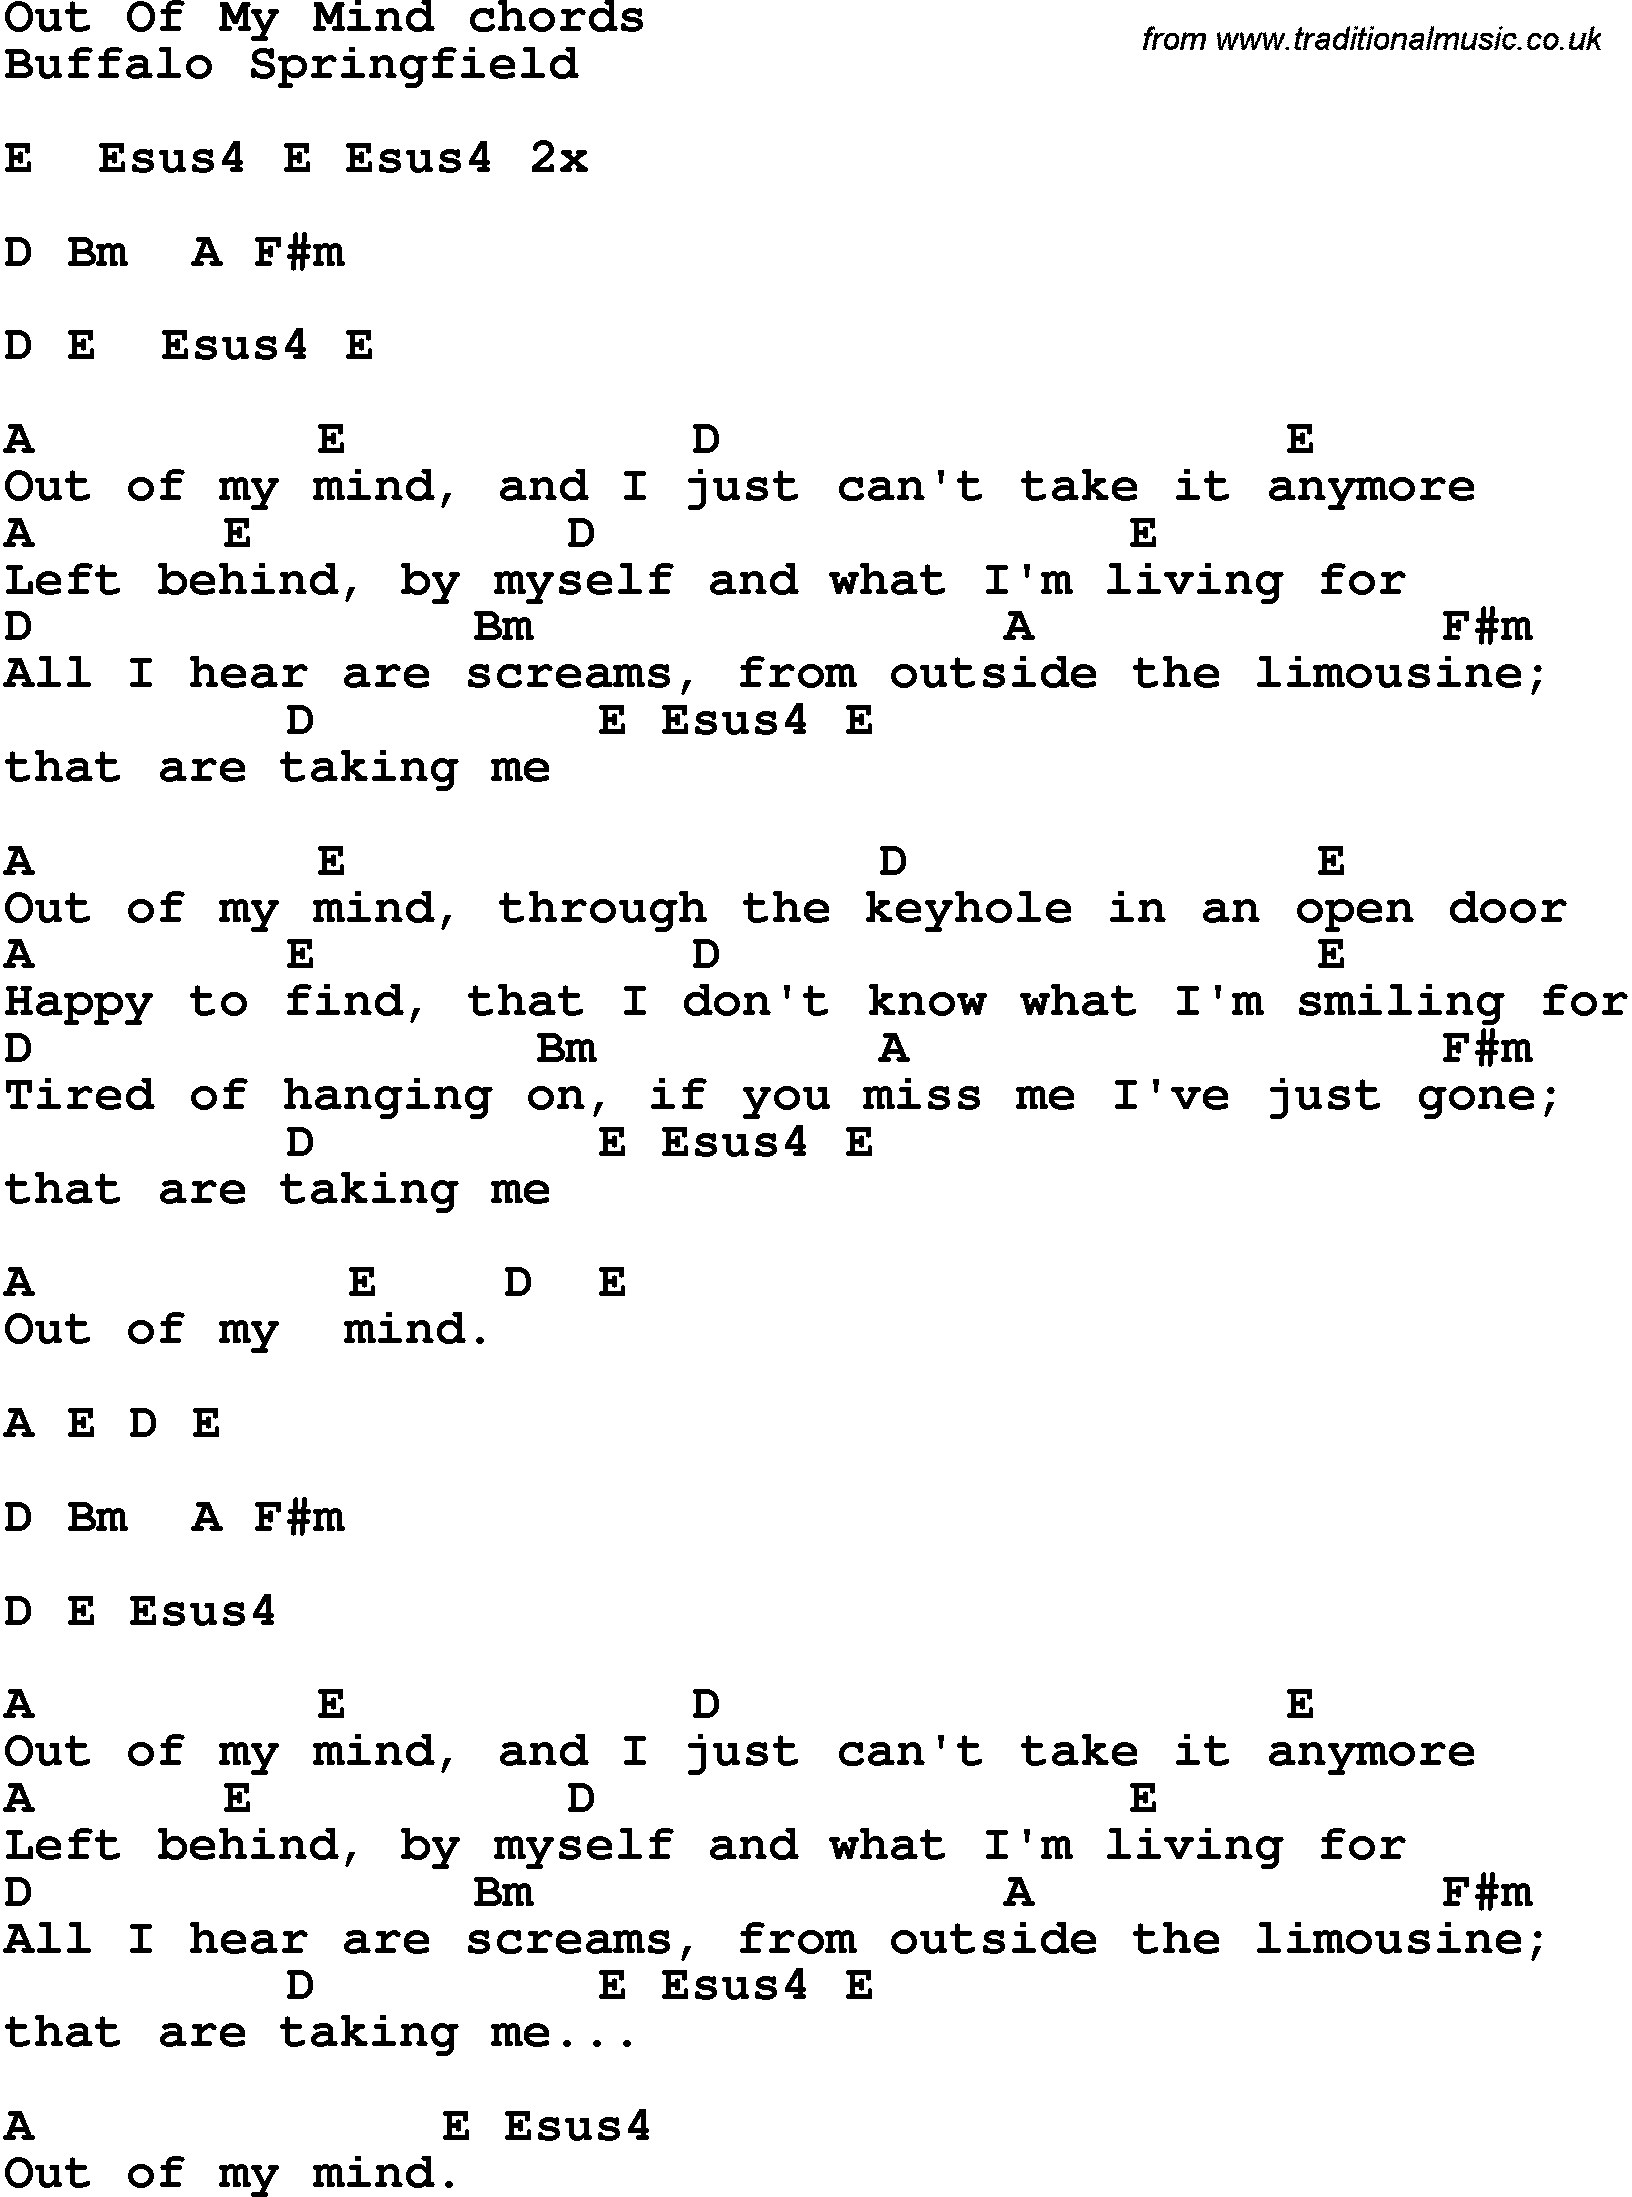 Song Lyrics with guitar chords for Out Of My Mind